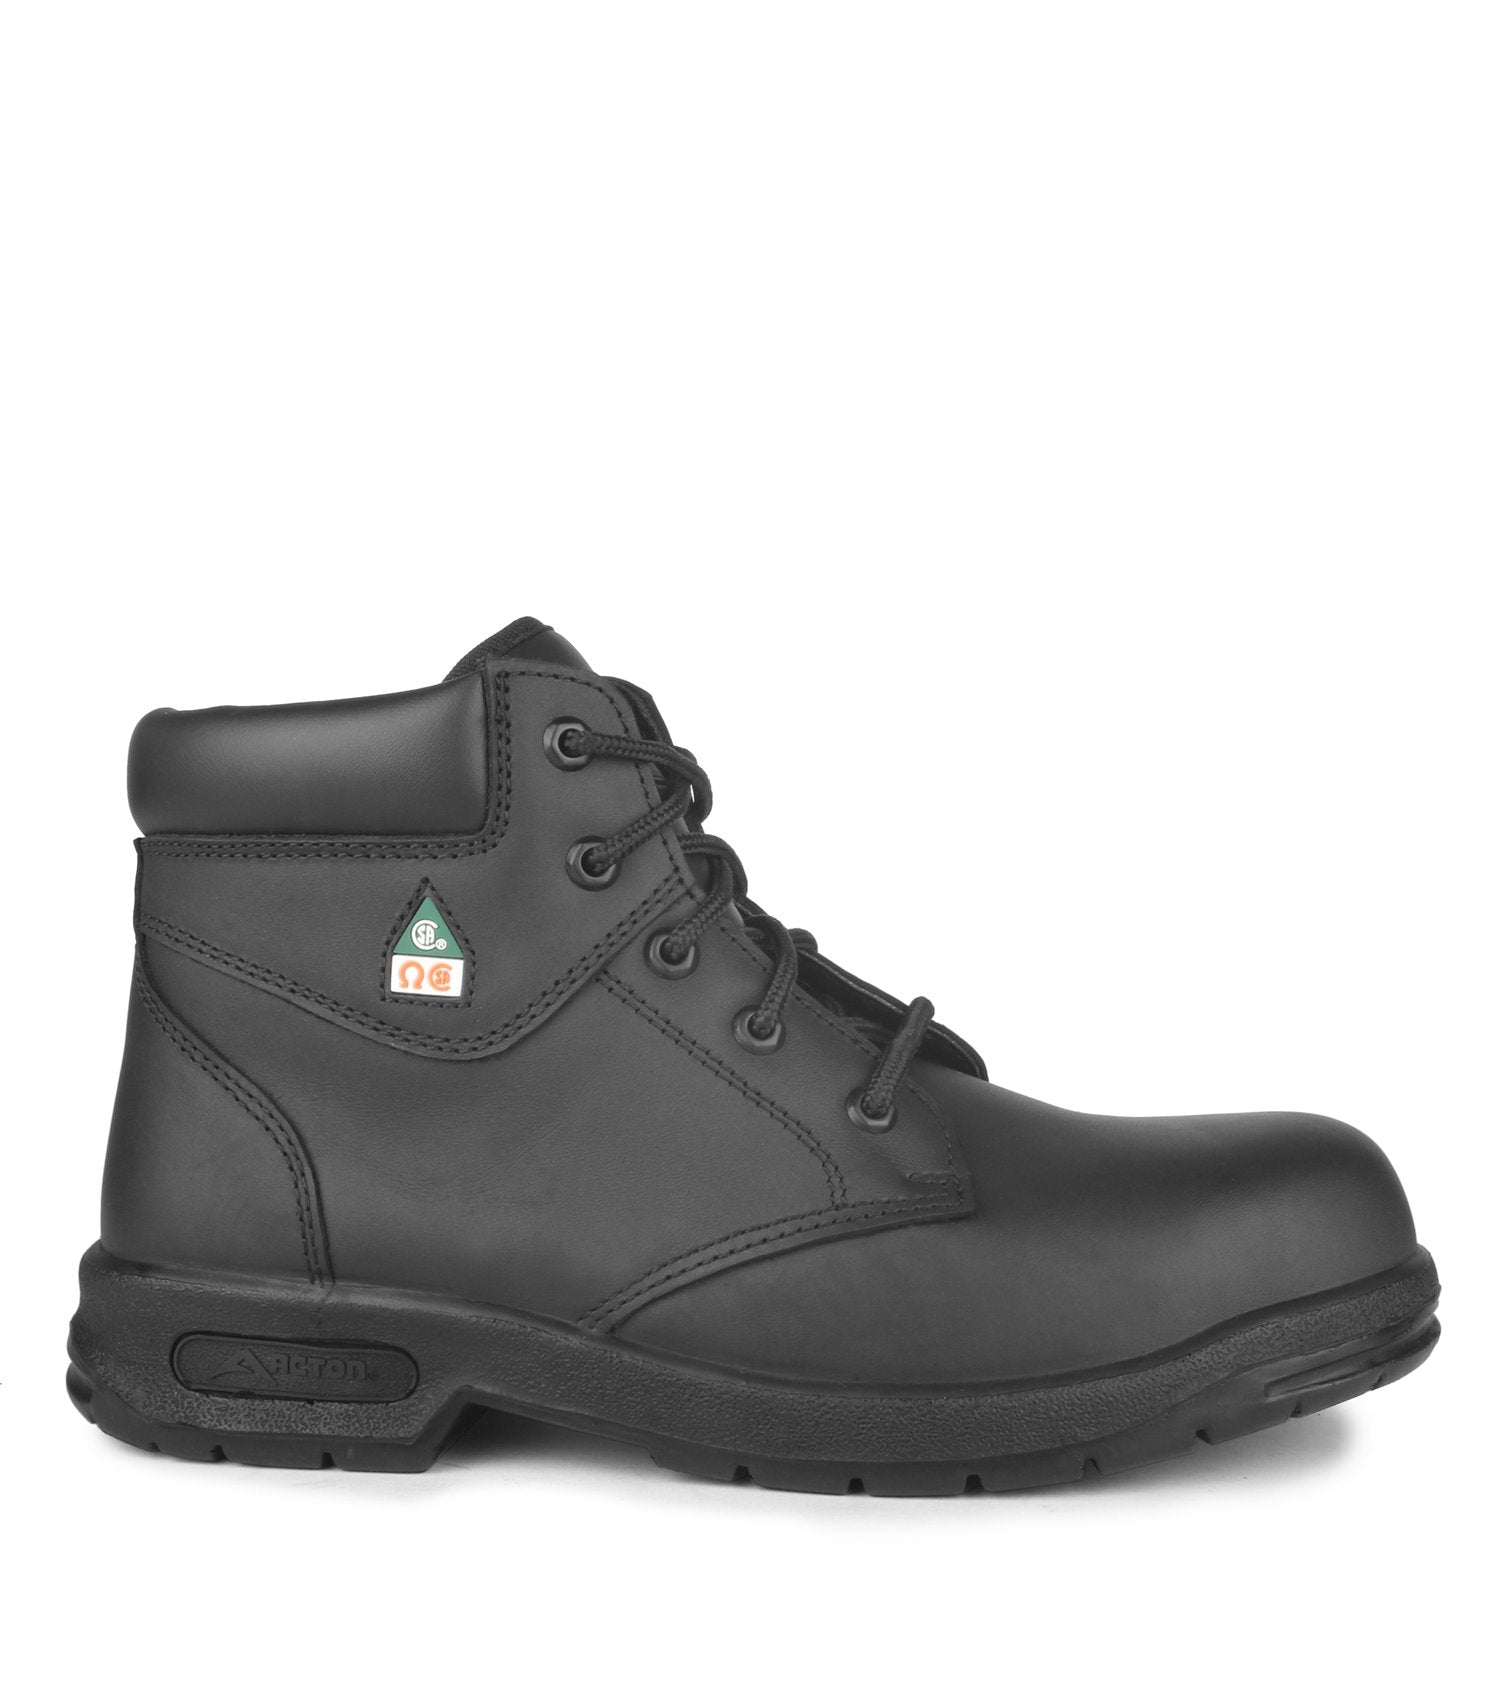 Acton ProFar 6" Men's Black Leather Steel Toe Safety Work Boots | Black | Size 6 - 13 Work Boots - Cleanflow